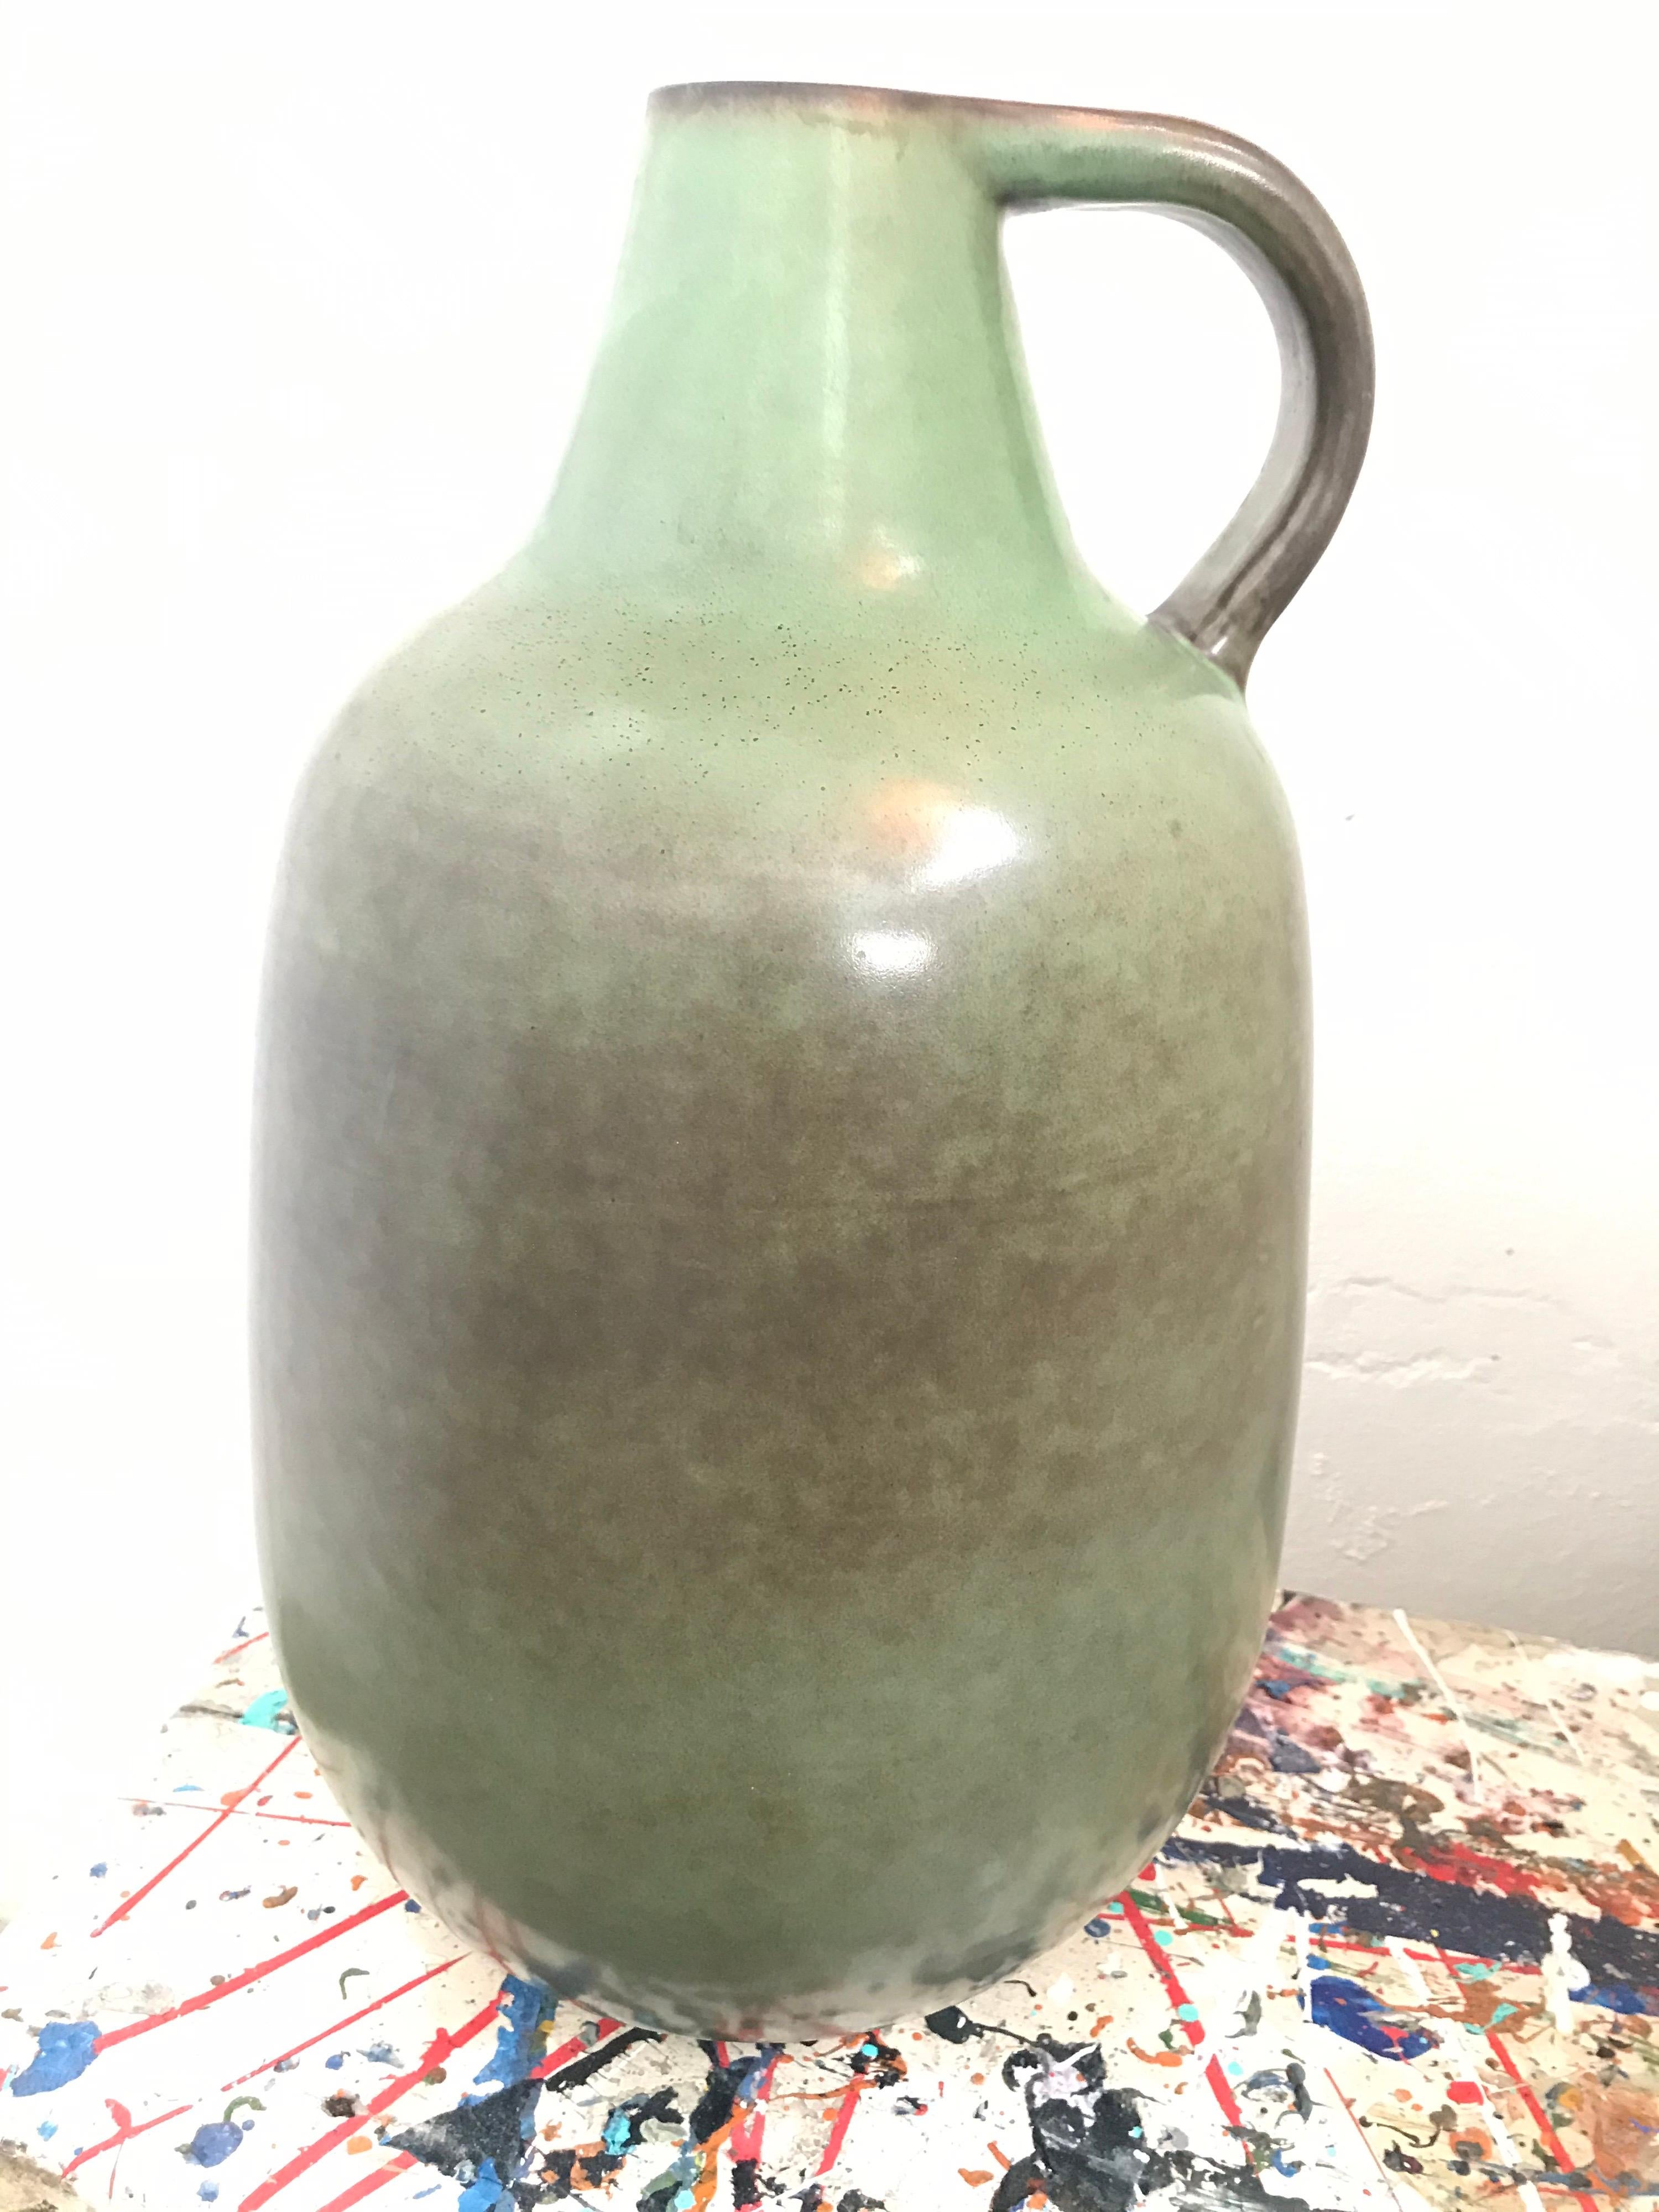 Vintage Danish midcentury Knabstrup floor vase in a beautiful green glaze.
In great condition with no cracks or chips and still with the original label on the base.
Knabstrup is a small railway town, with a population of 1,074 at the railroad